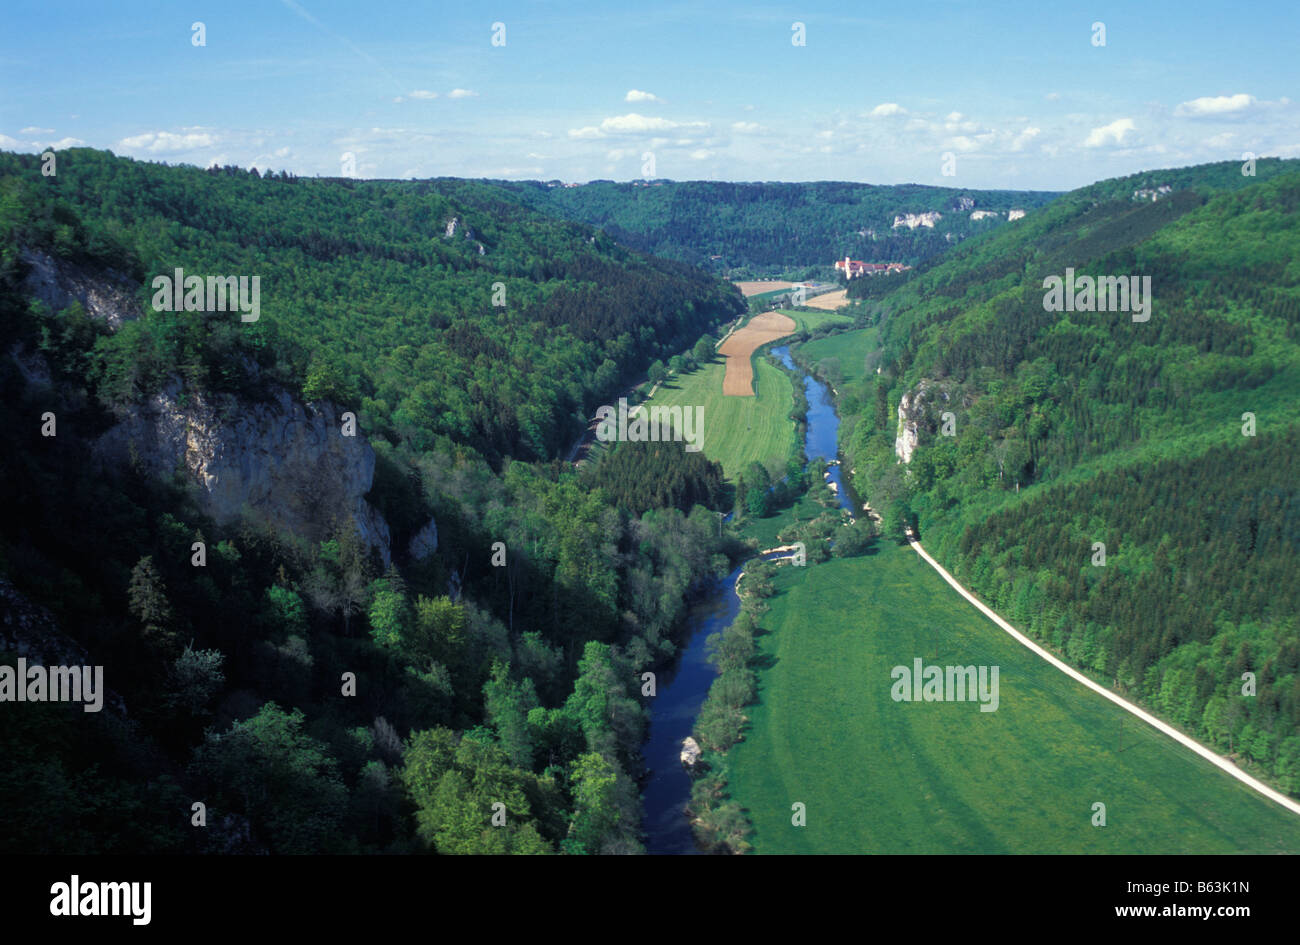 View to Cloister Beuron, Danube Valley, Swabian Alb,Baden Wurttemberg, Germany Stock Photo